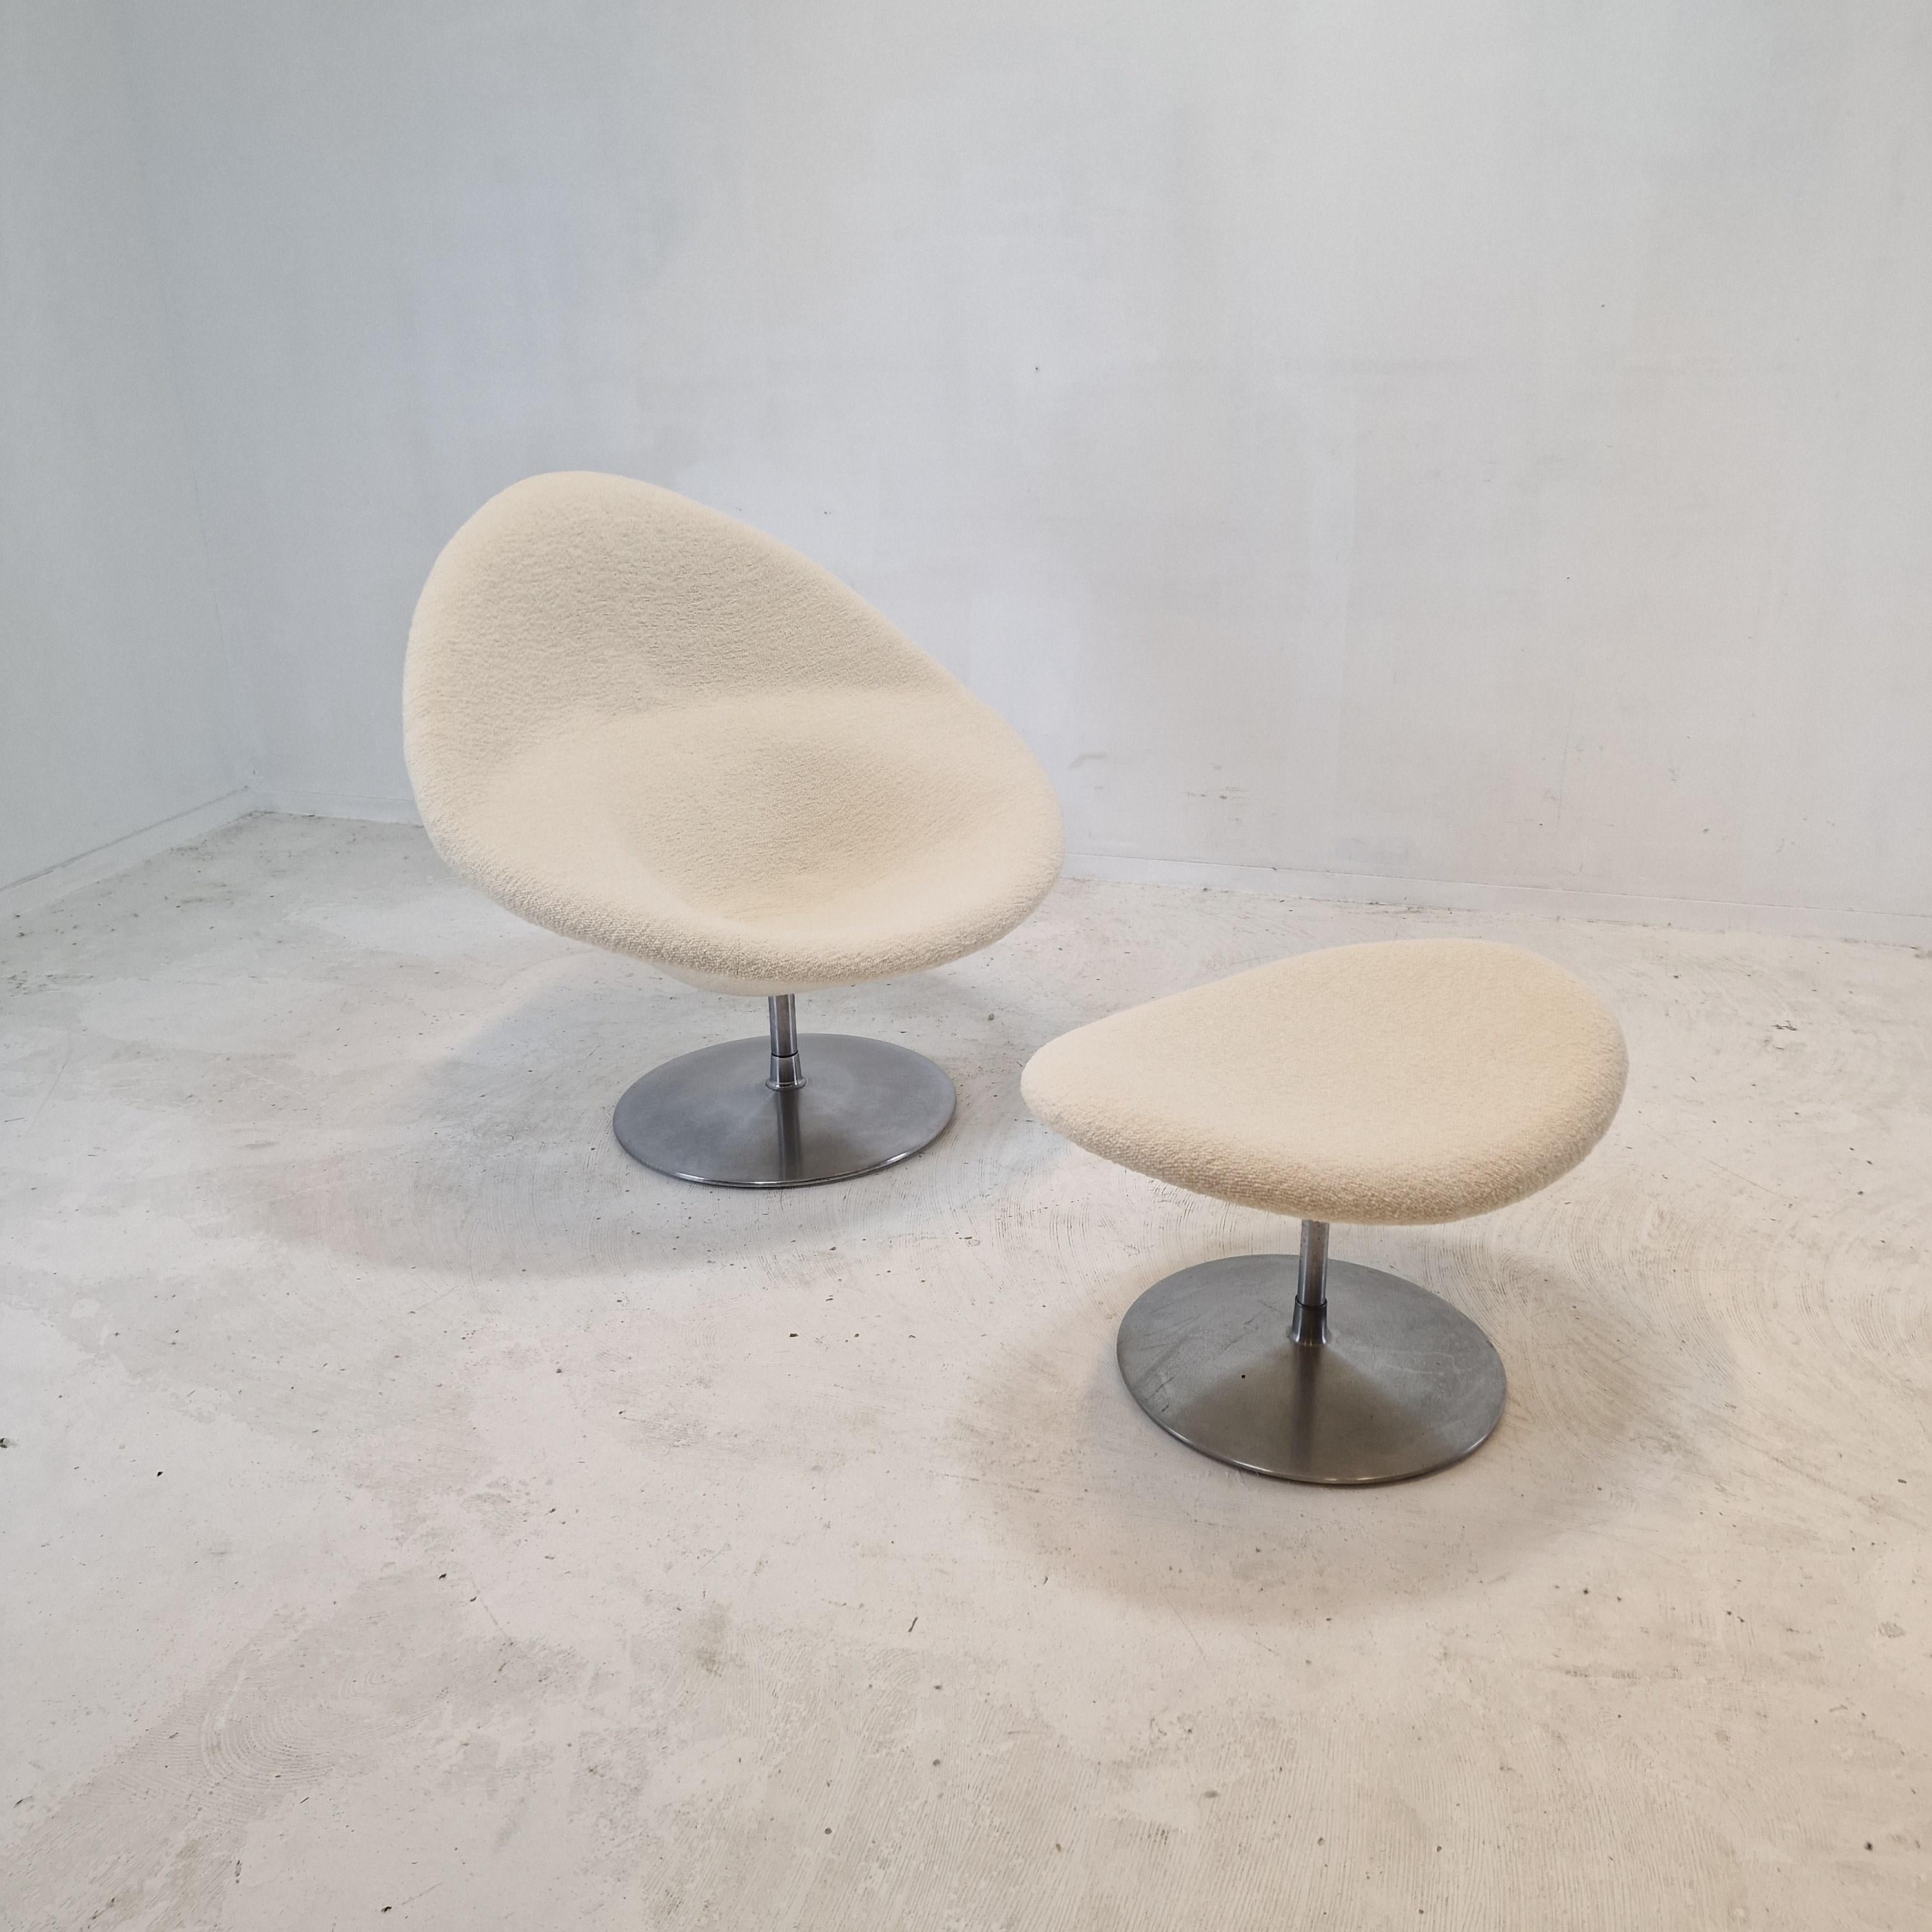 Very comfortable and turnable Big Globe Lounge Chair with Ottoman.
The Globe Chair is designed by Pierre Paulin for Artifort in 1959, this particular set is fabricated in the 1960s.

The chair is just reupholstered with high quality Dedar wool